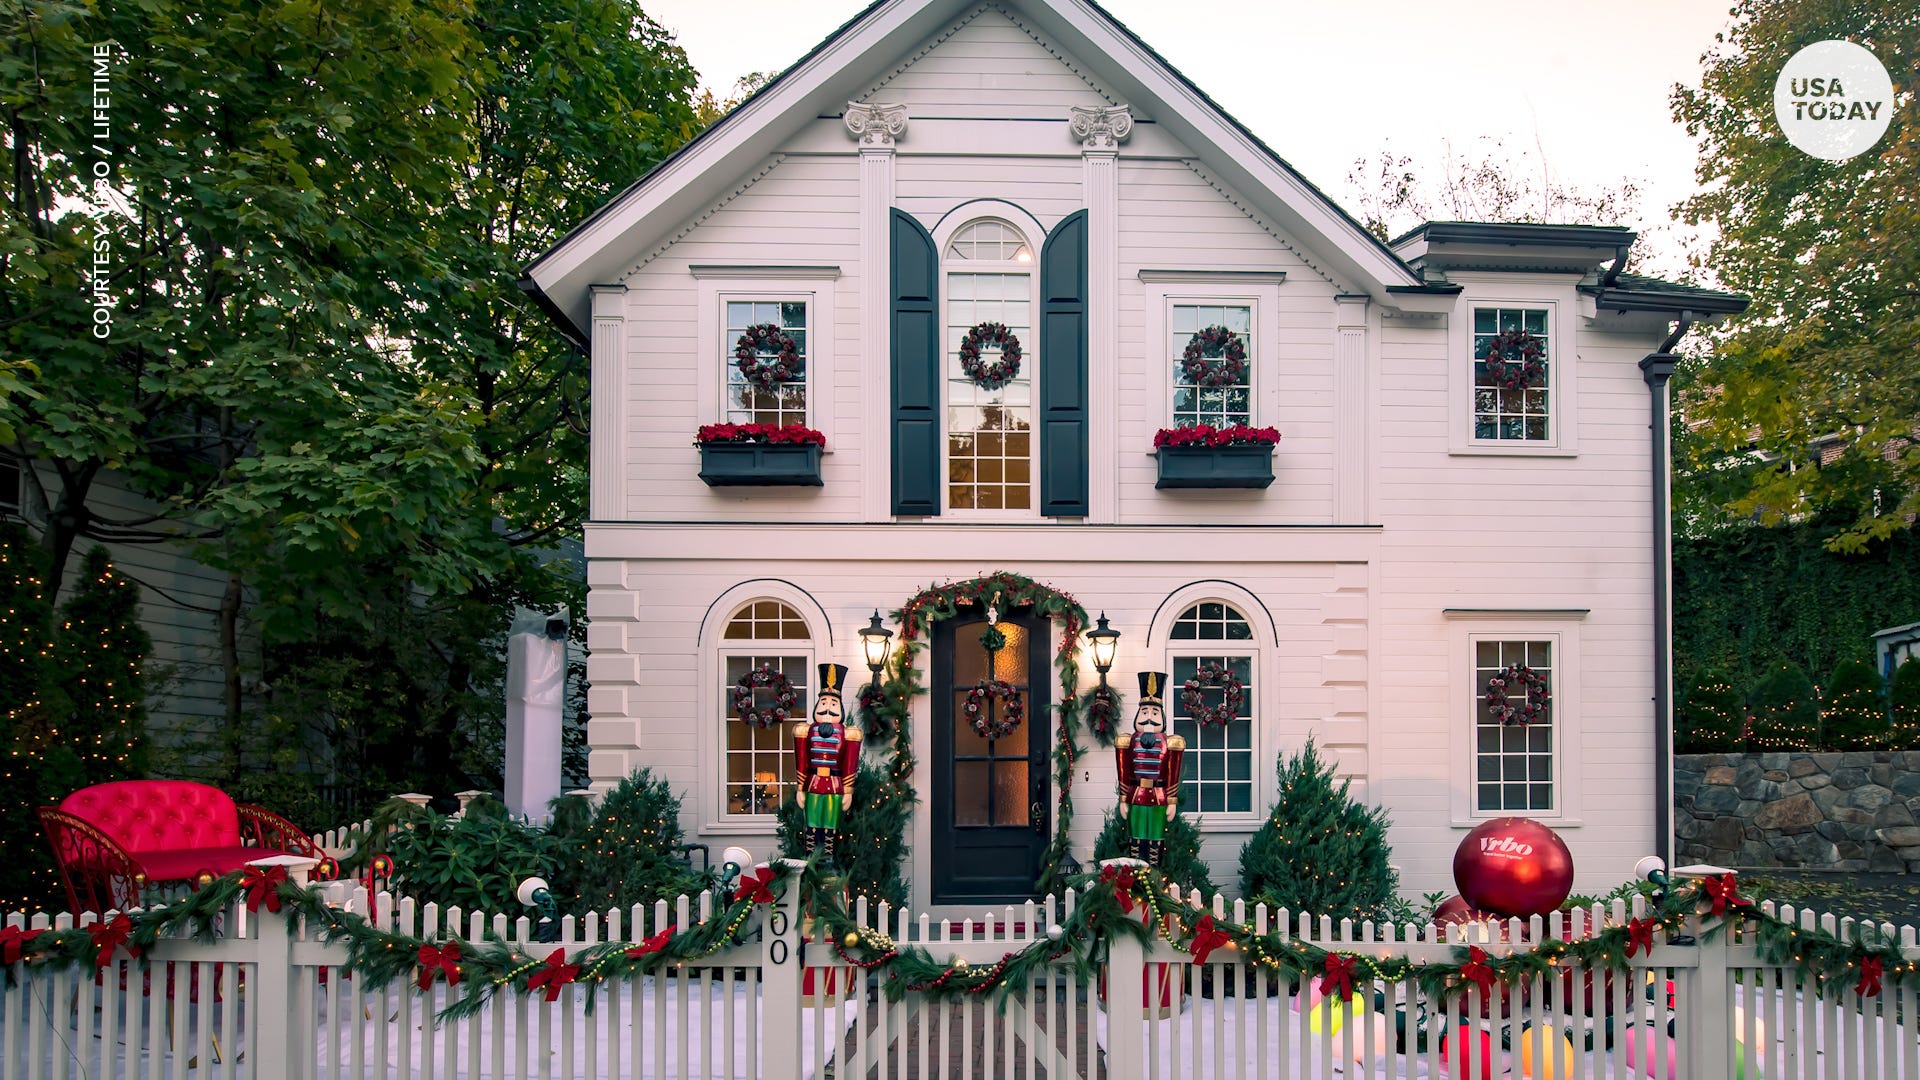 You can stay in a real-life Lifetime holiday movie house this Christmas